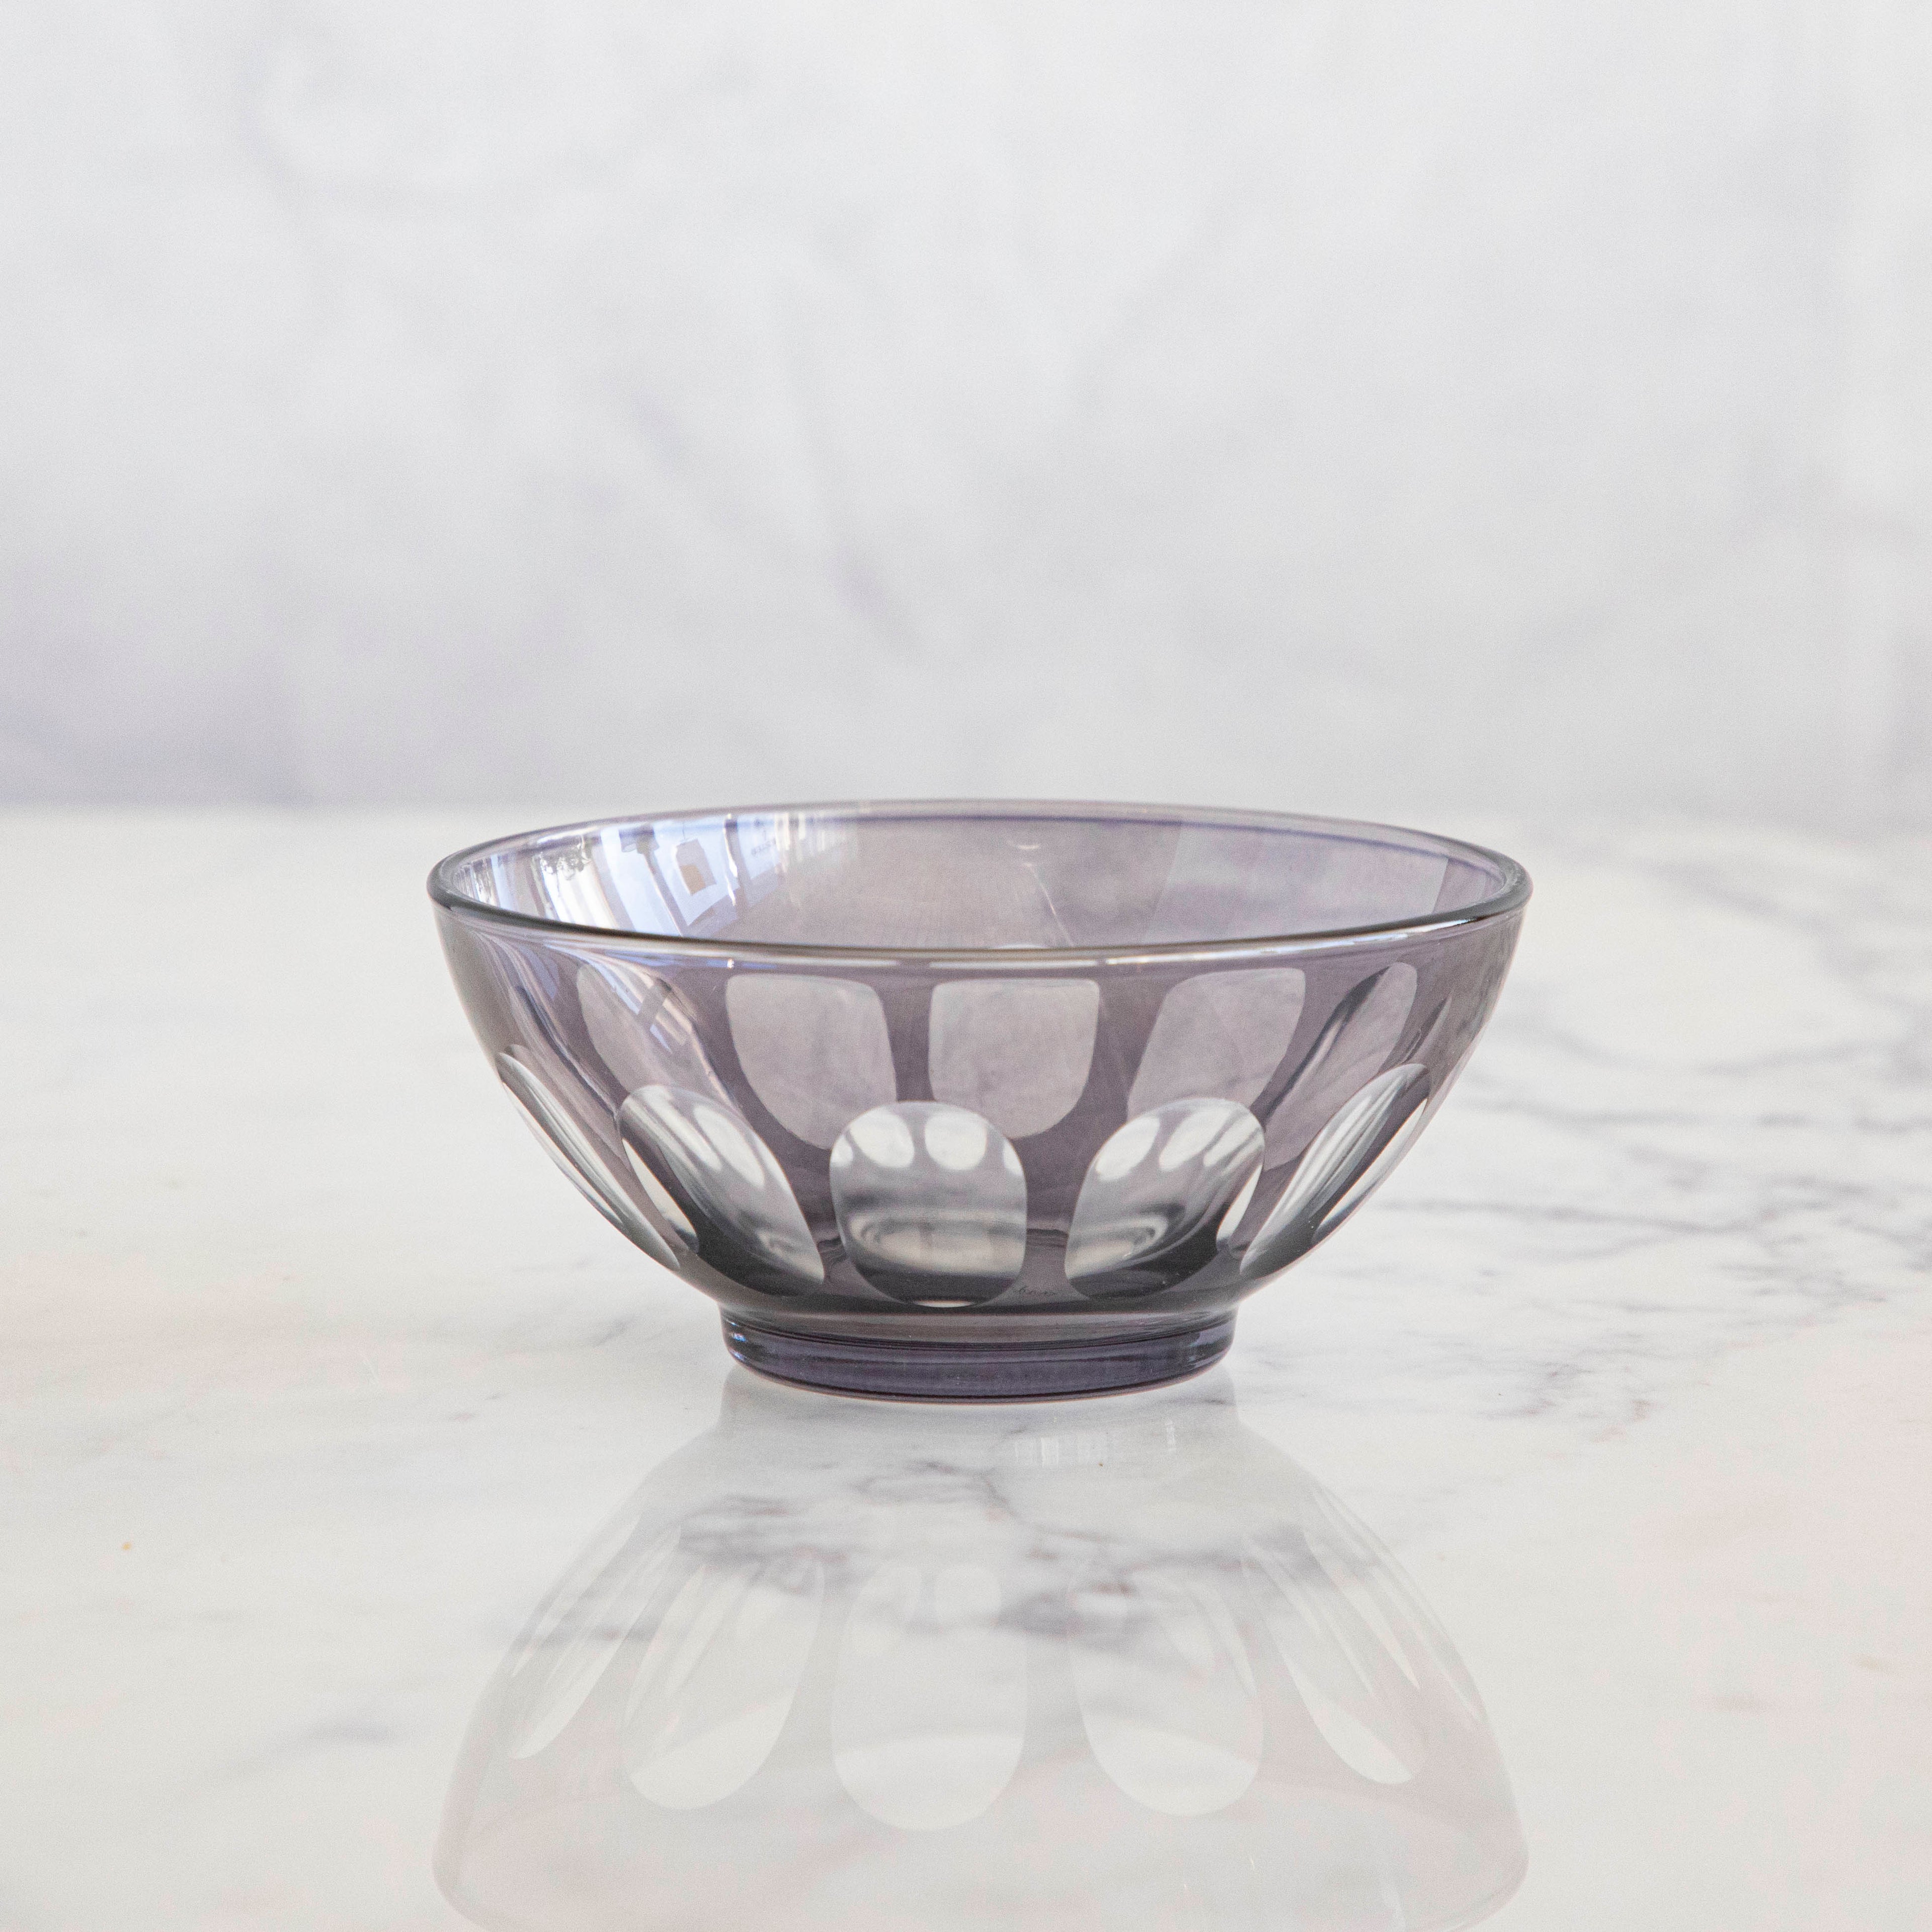 A Rialto Smoke Glass Bowl by SIR/MADAM on a marble surface with reflections below, reminiscent of Venice-inspired glassware.